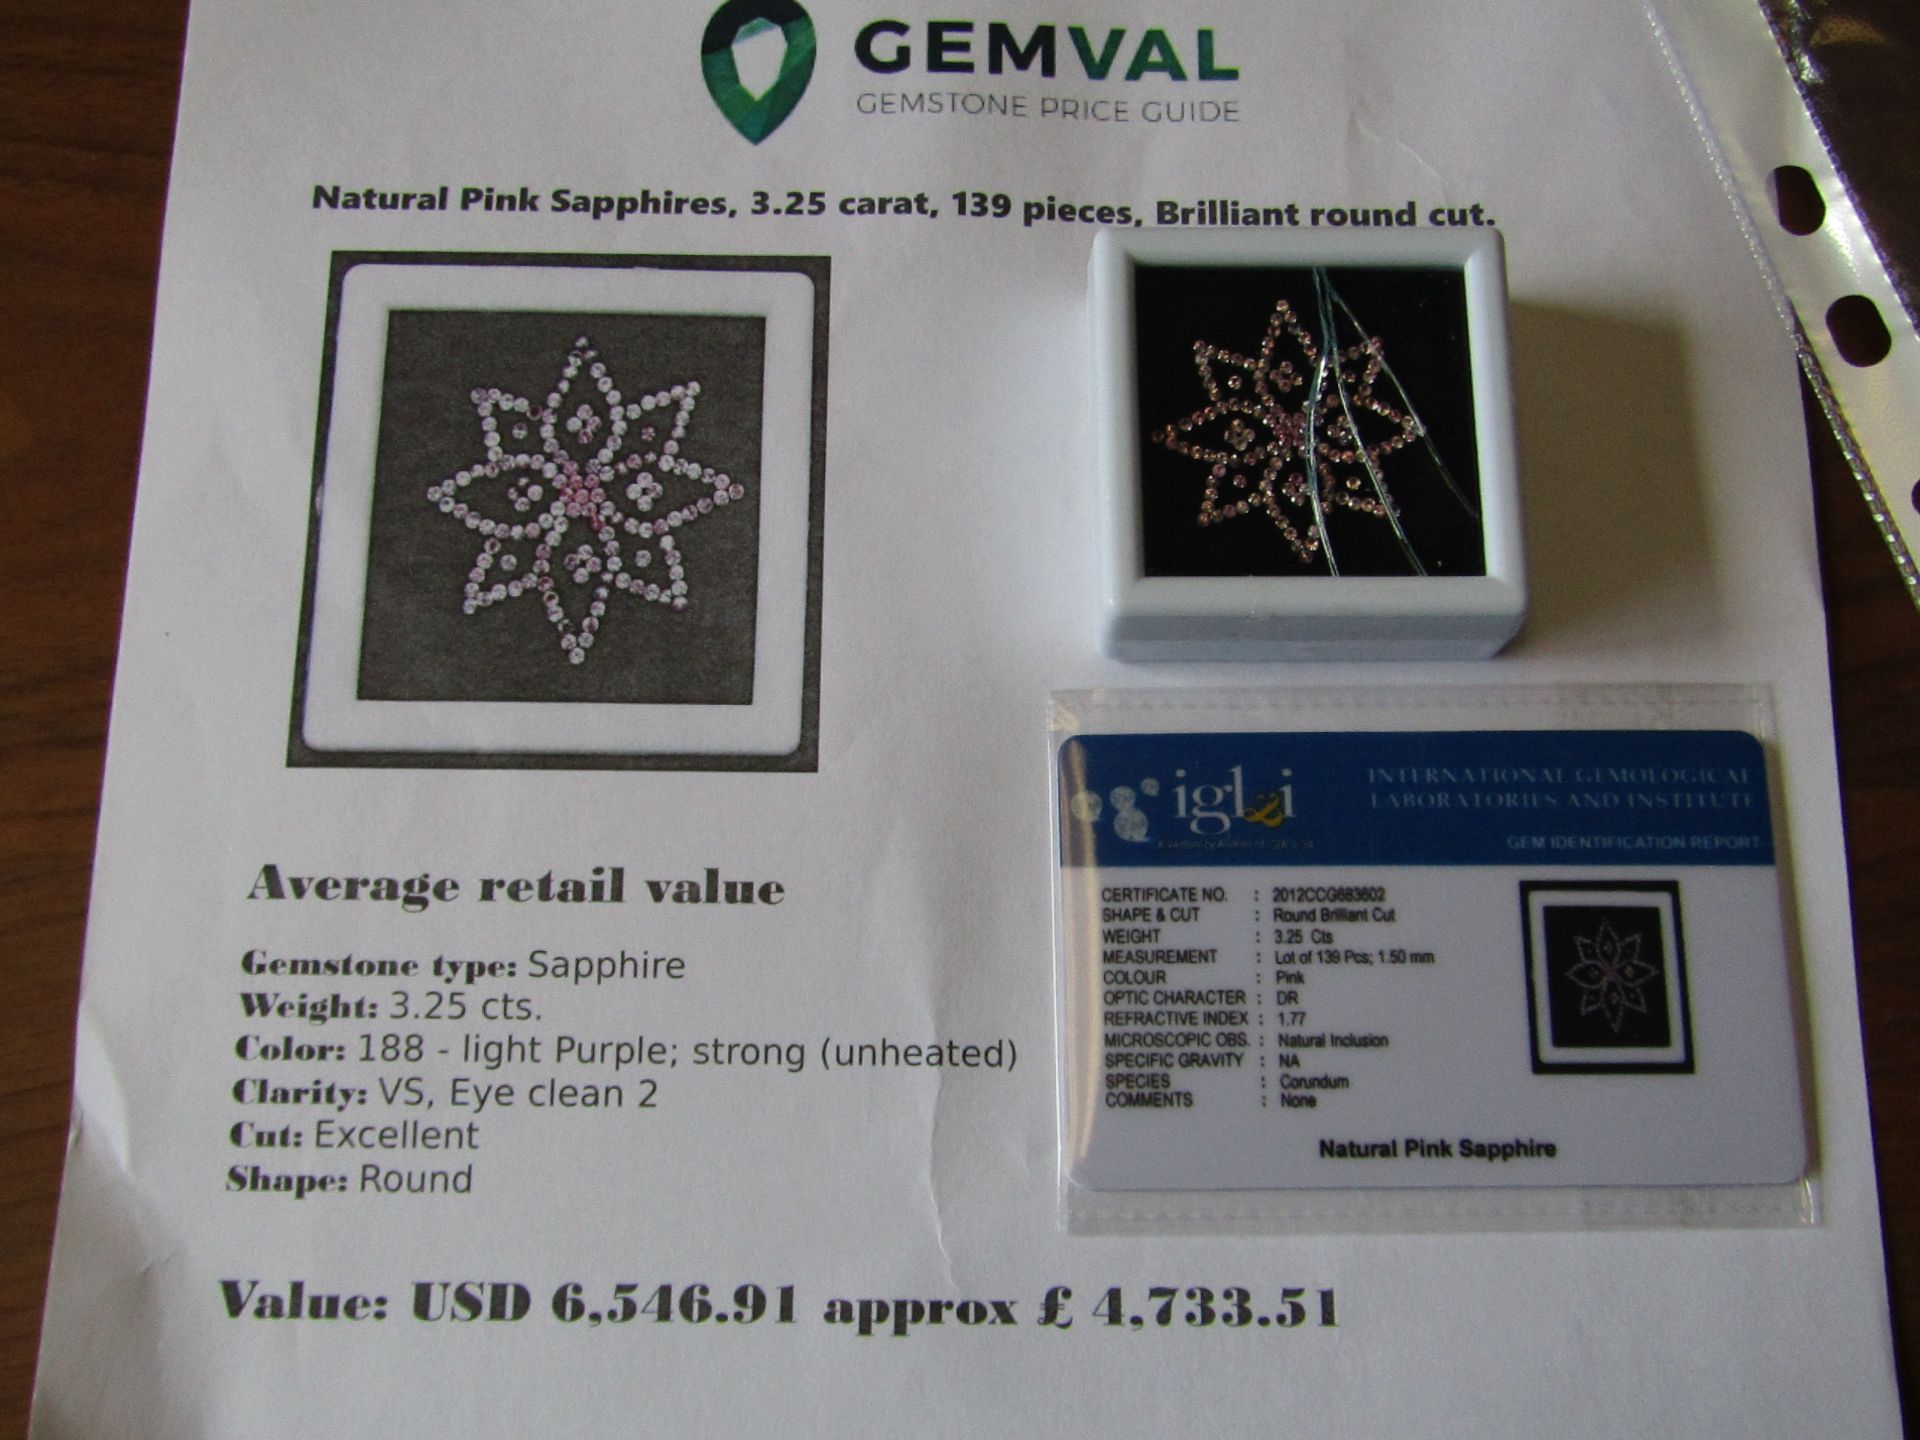 IGL&I Certified - Natural Pink Sapphires - 3.25 carats - 139 pieces - Average retail value £4,733.51